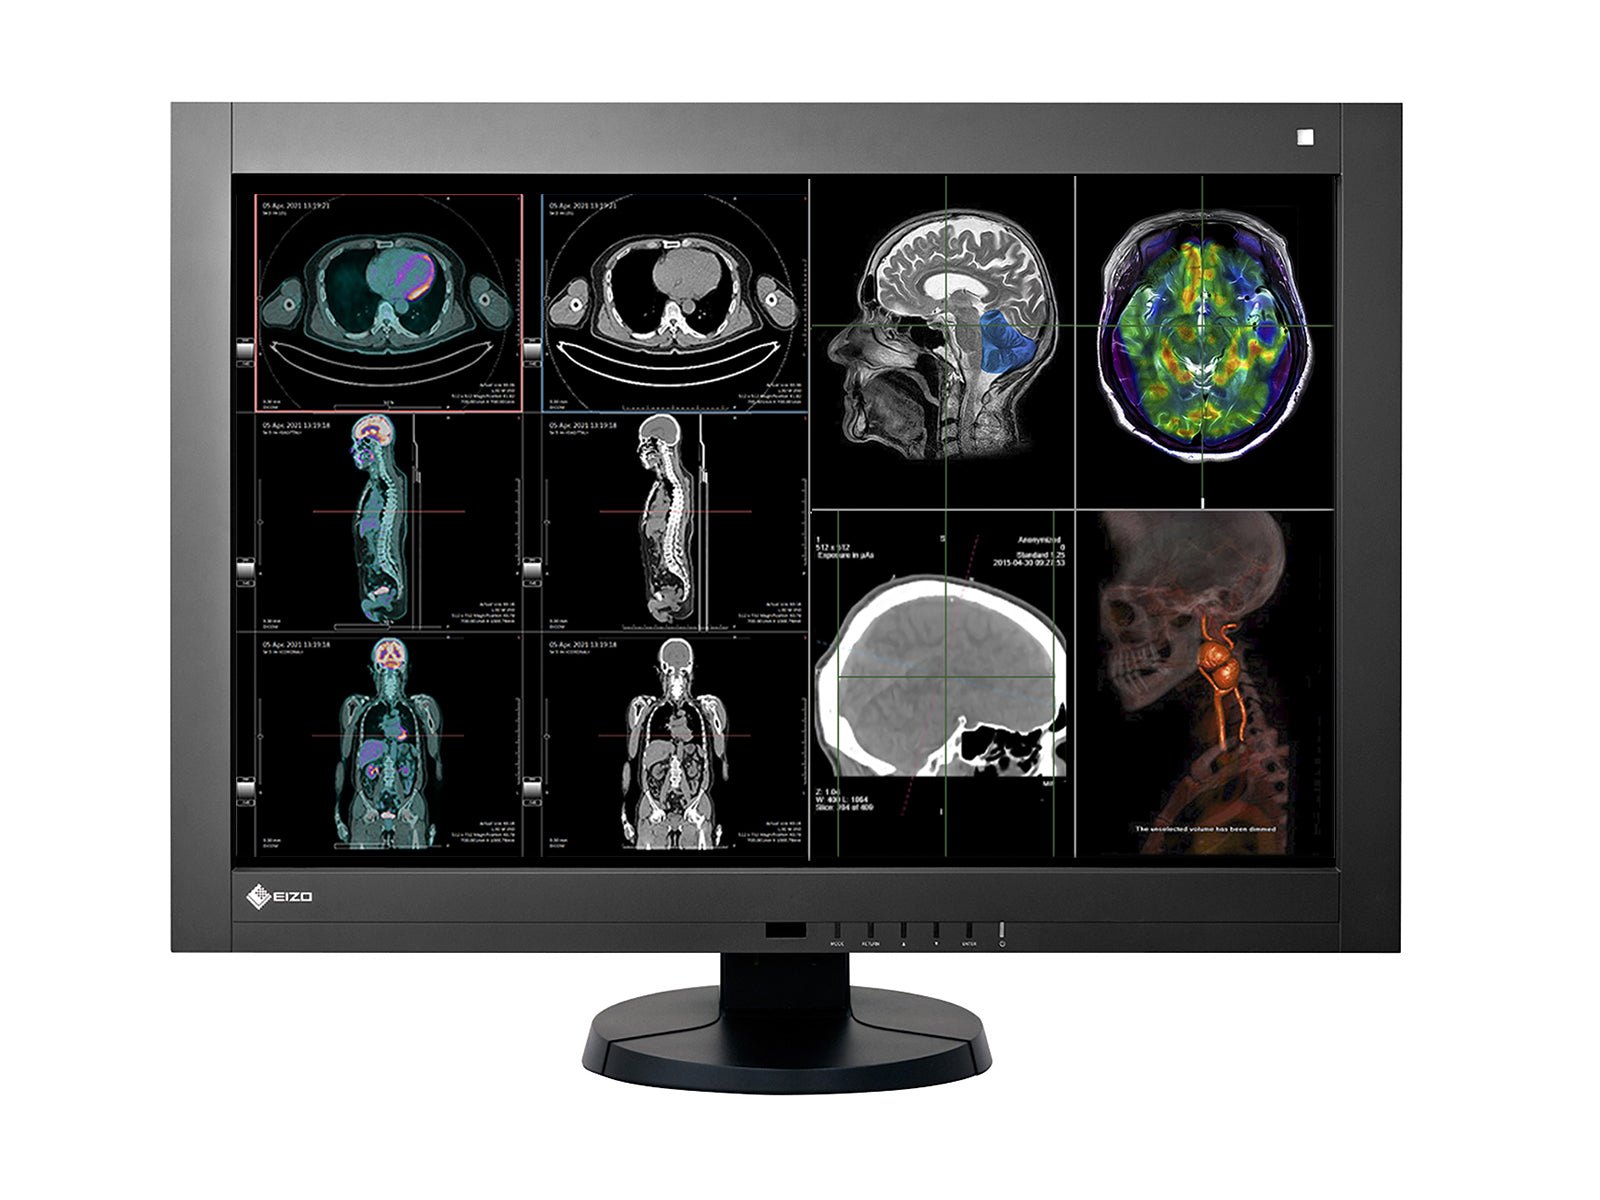 Complete PACS General Radiology Station | Eizo 4MP Color LED Displays | Dell Workstation | Dictation Mic | Worklist Monitor (RX4405820) Monitors.com 